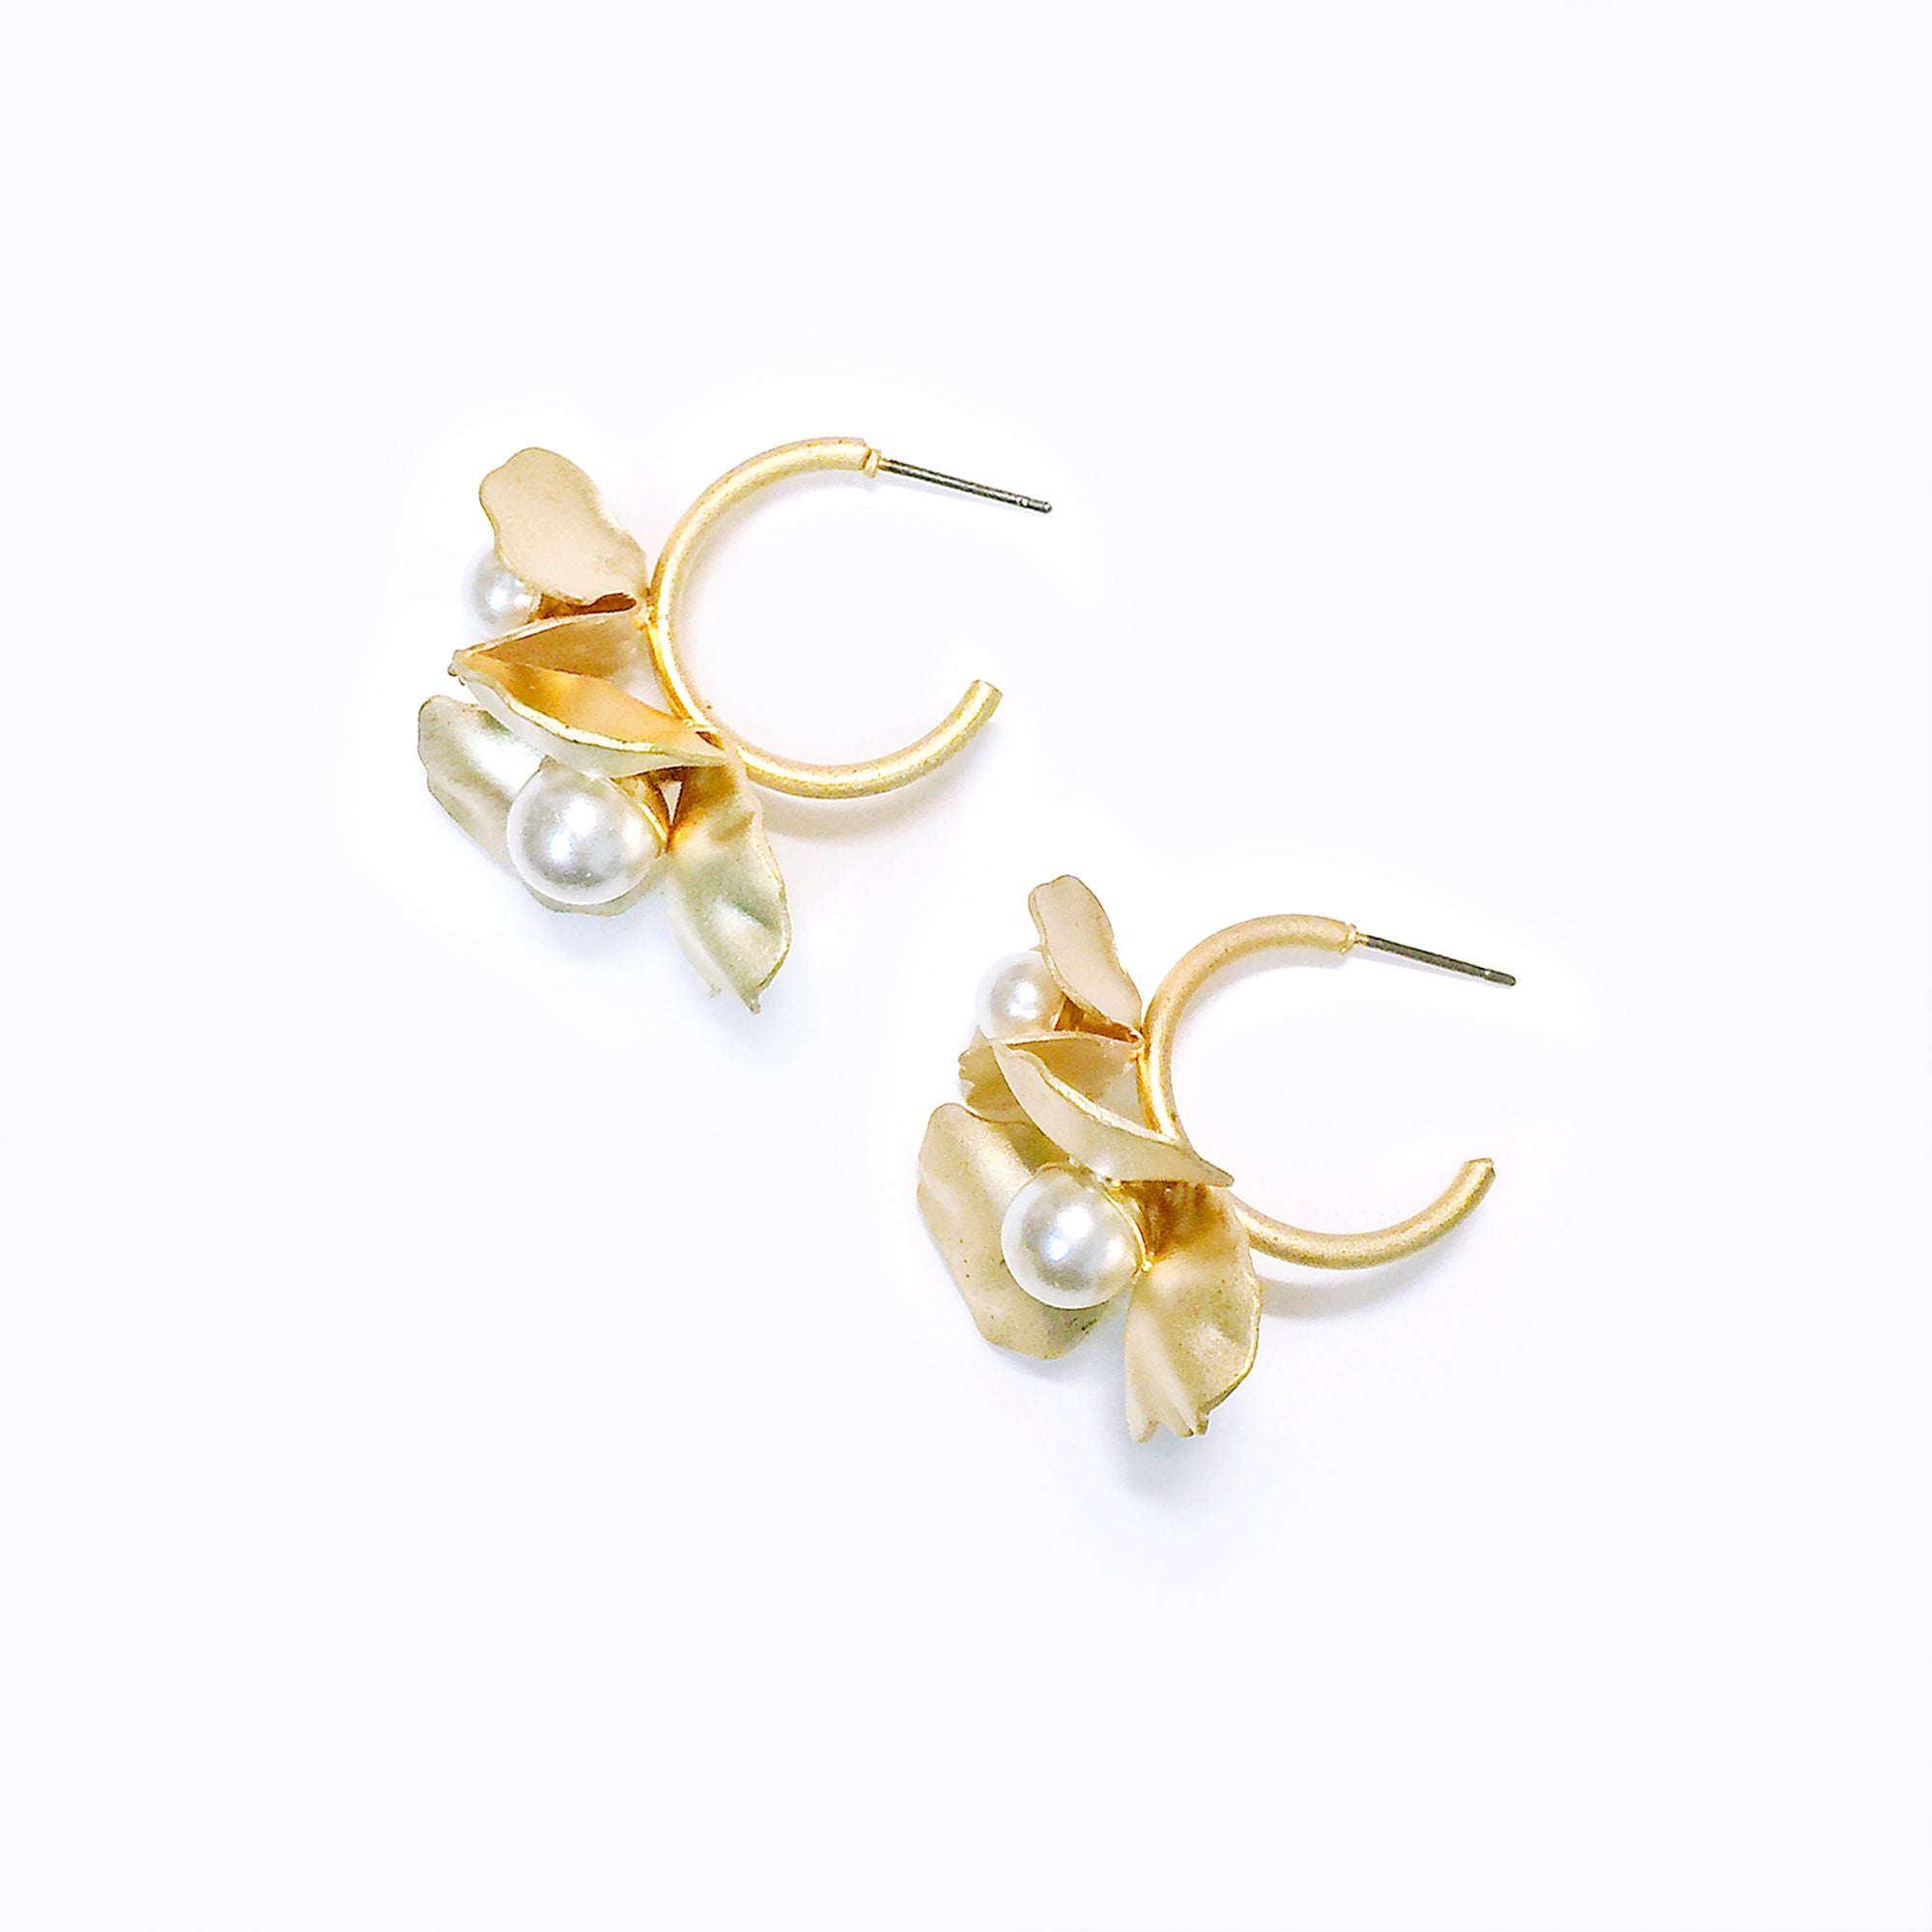 Morning Glory Earrings with Pearls